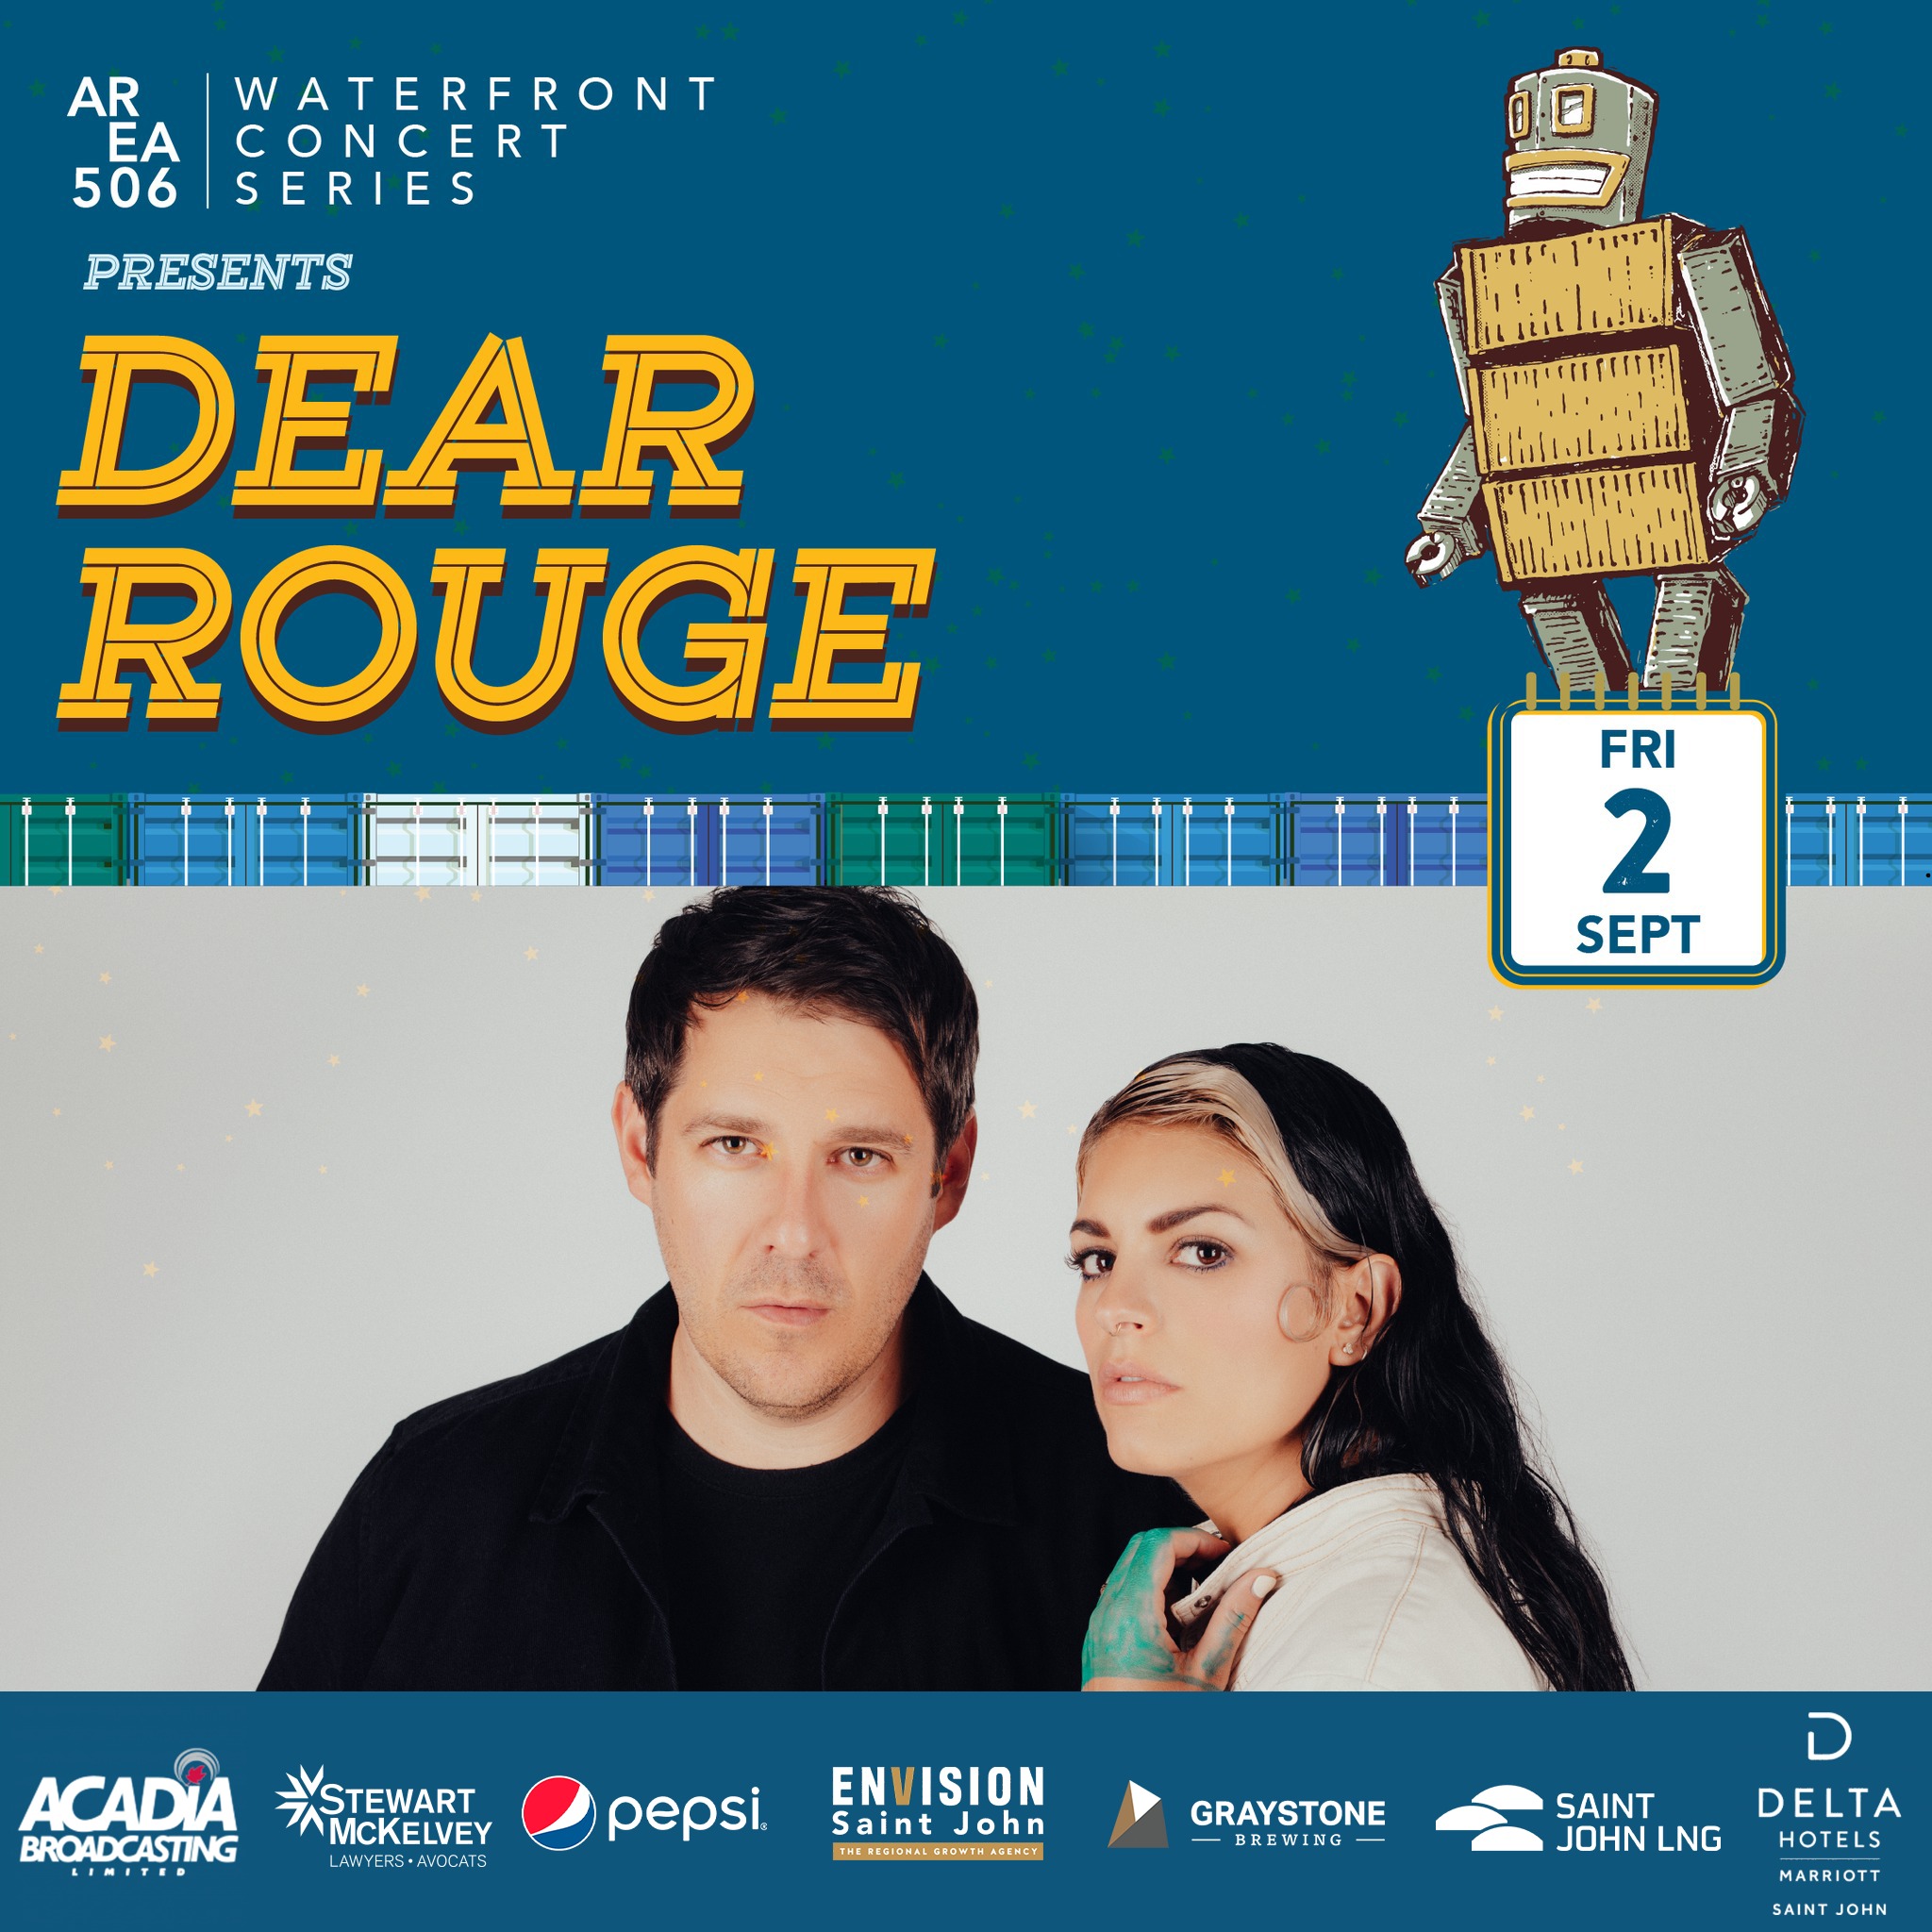 Area 506 Waterfront Concert Series Presents, Dear Rouge. Friday, 2 September.